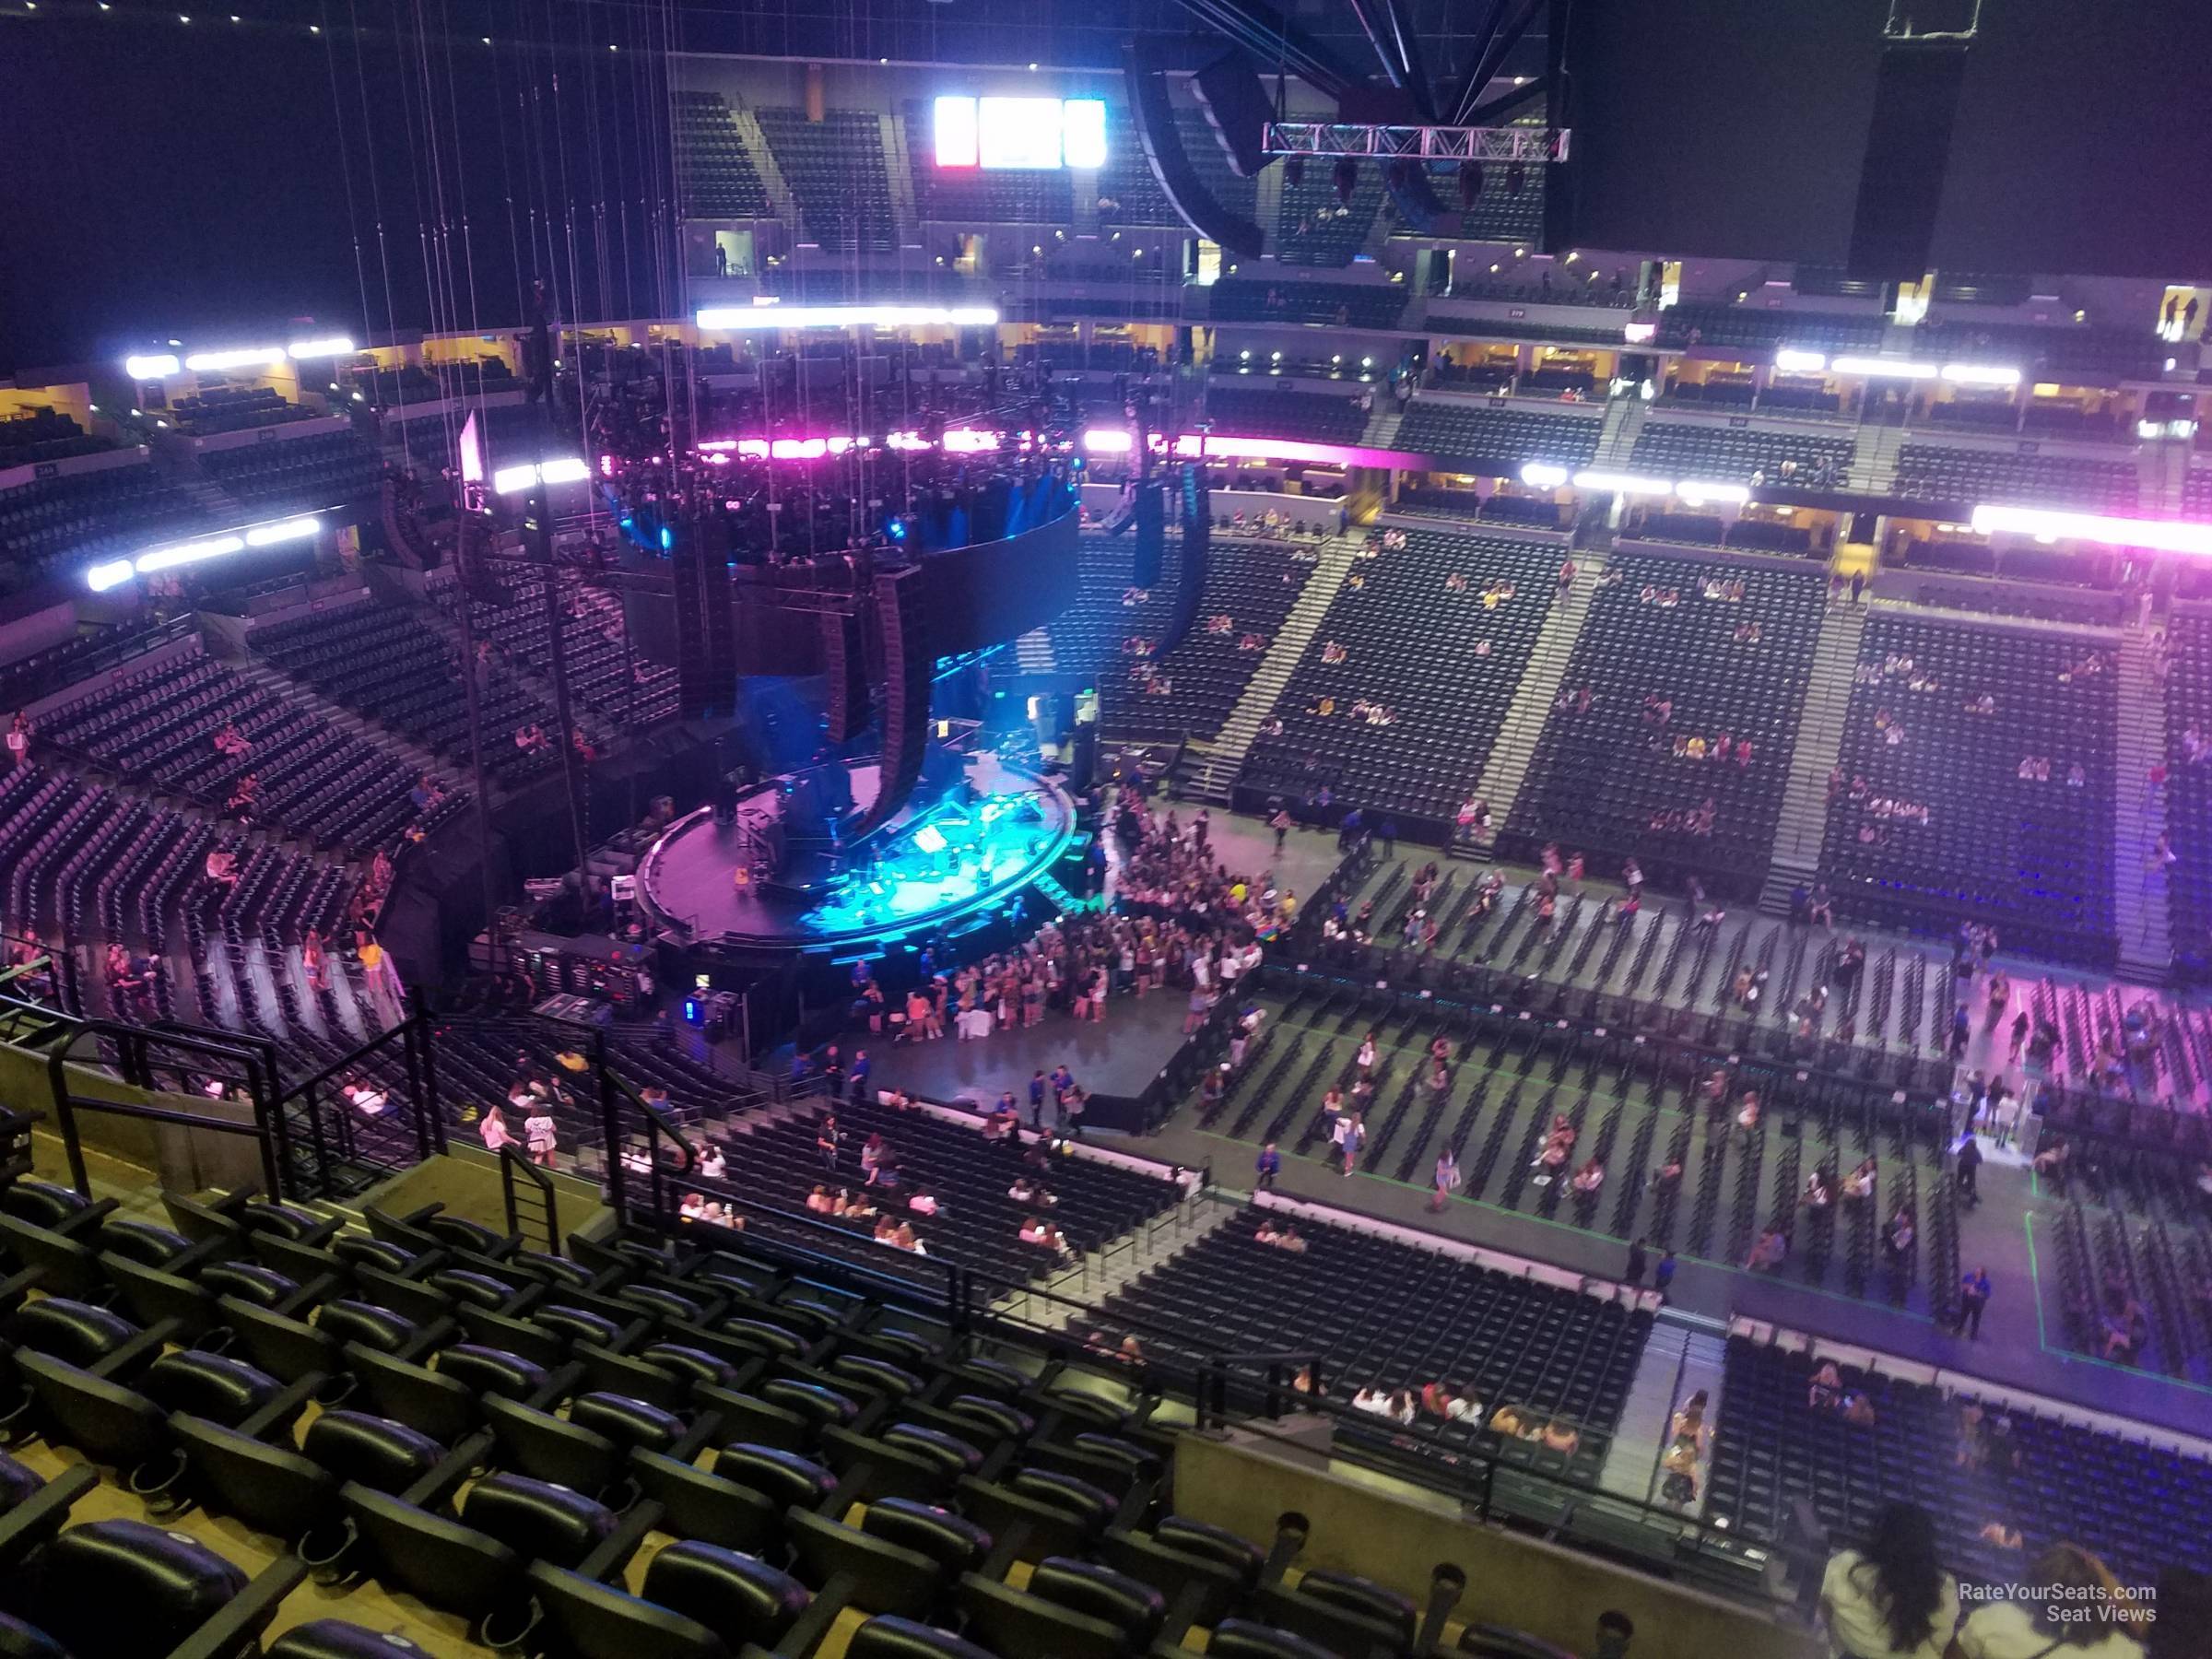 section 344, row 13 seat view  for concert - ball arena